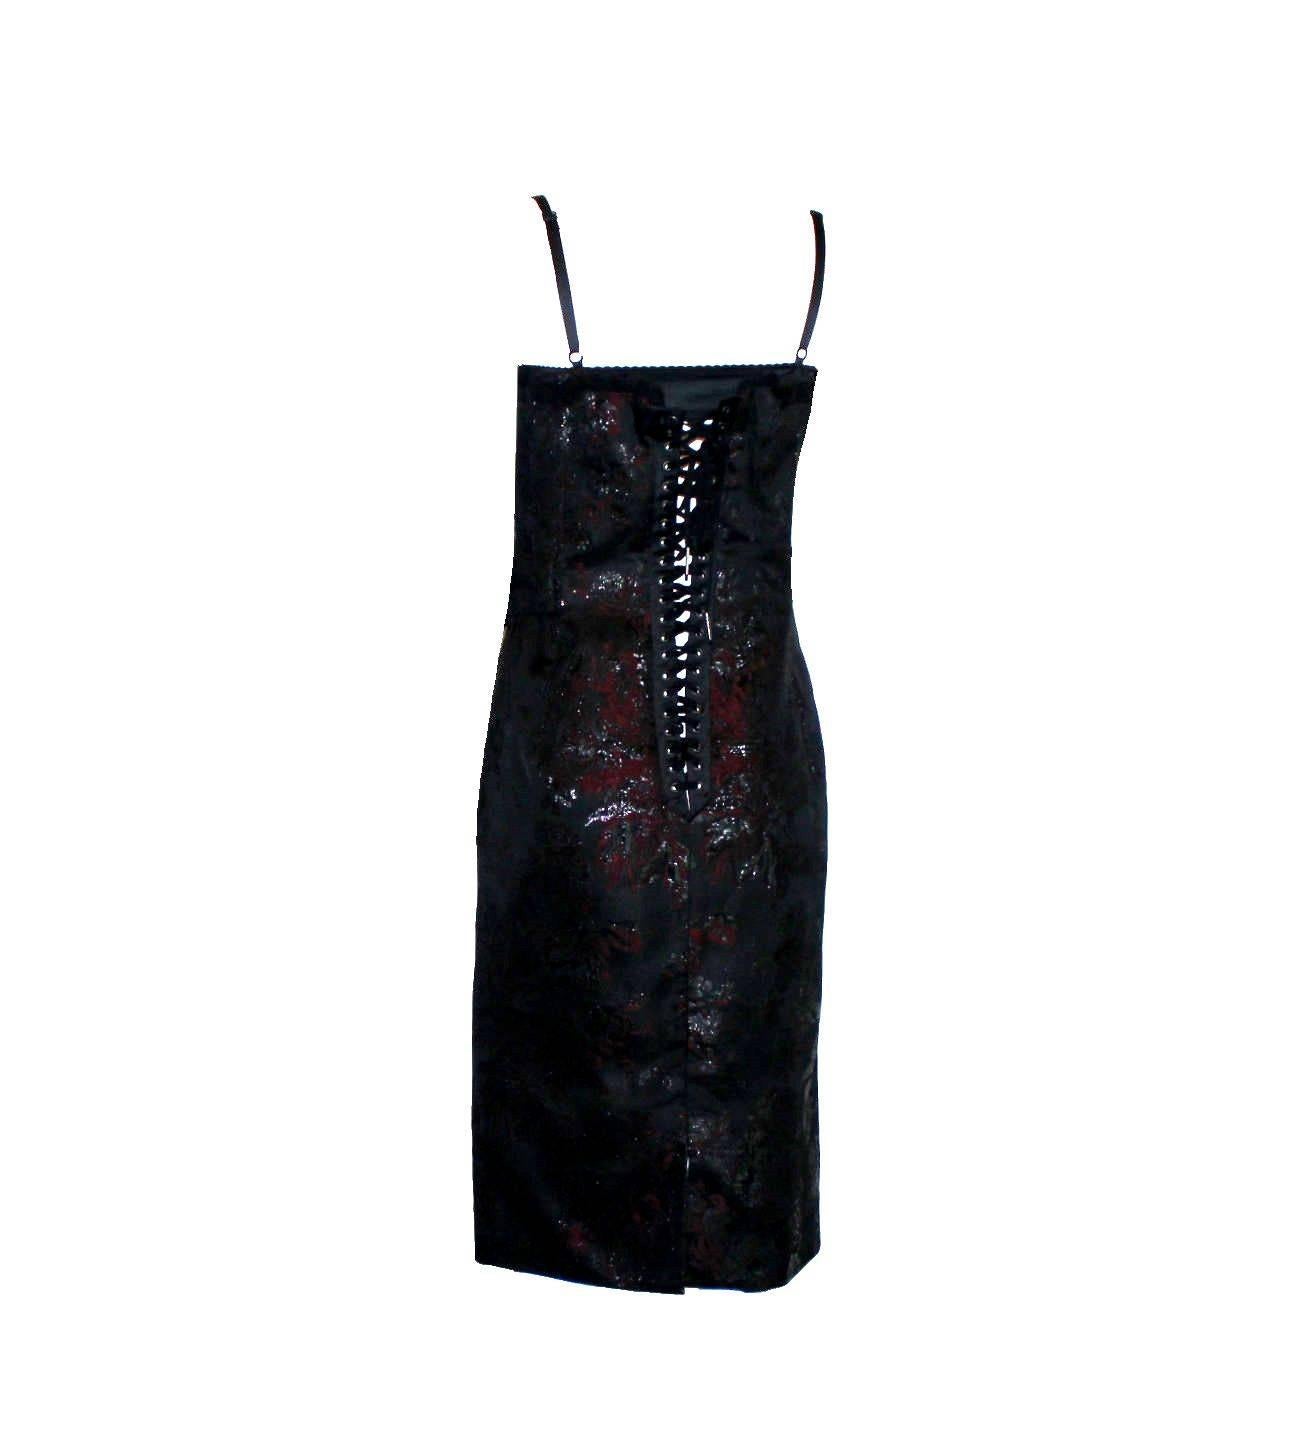 Black Dolce Gabbana Lace Up Corset Dress with Jeweled Crystal Brooch Ornament